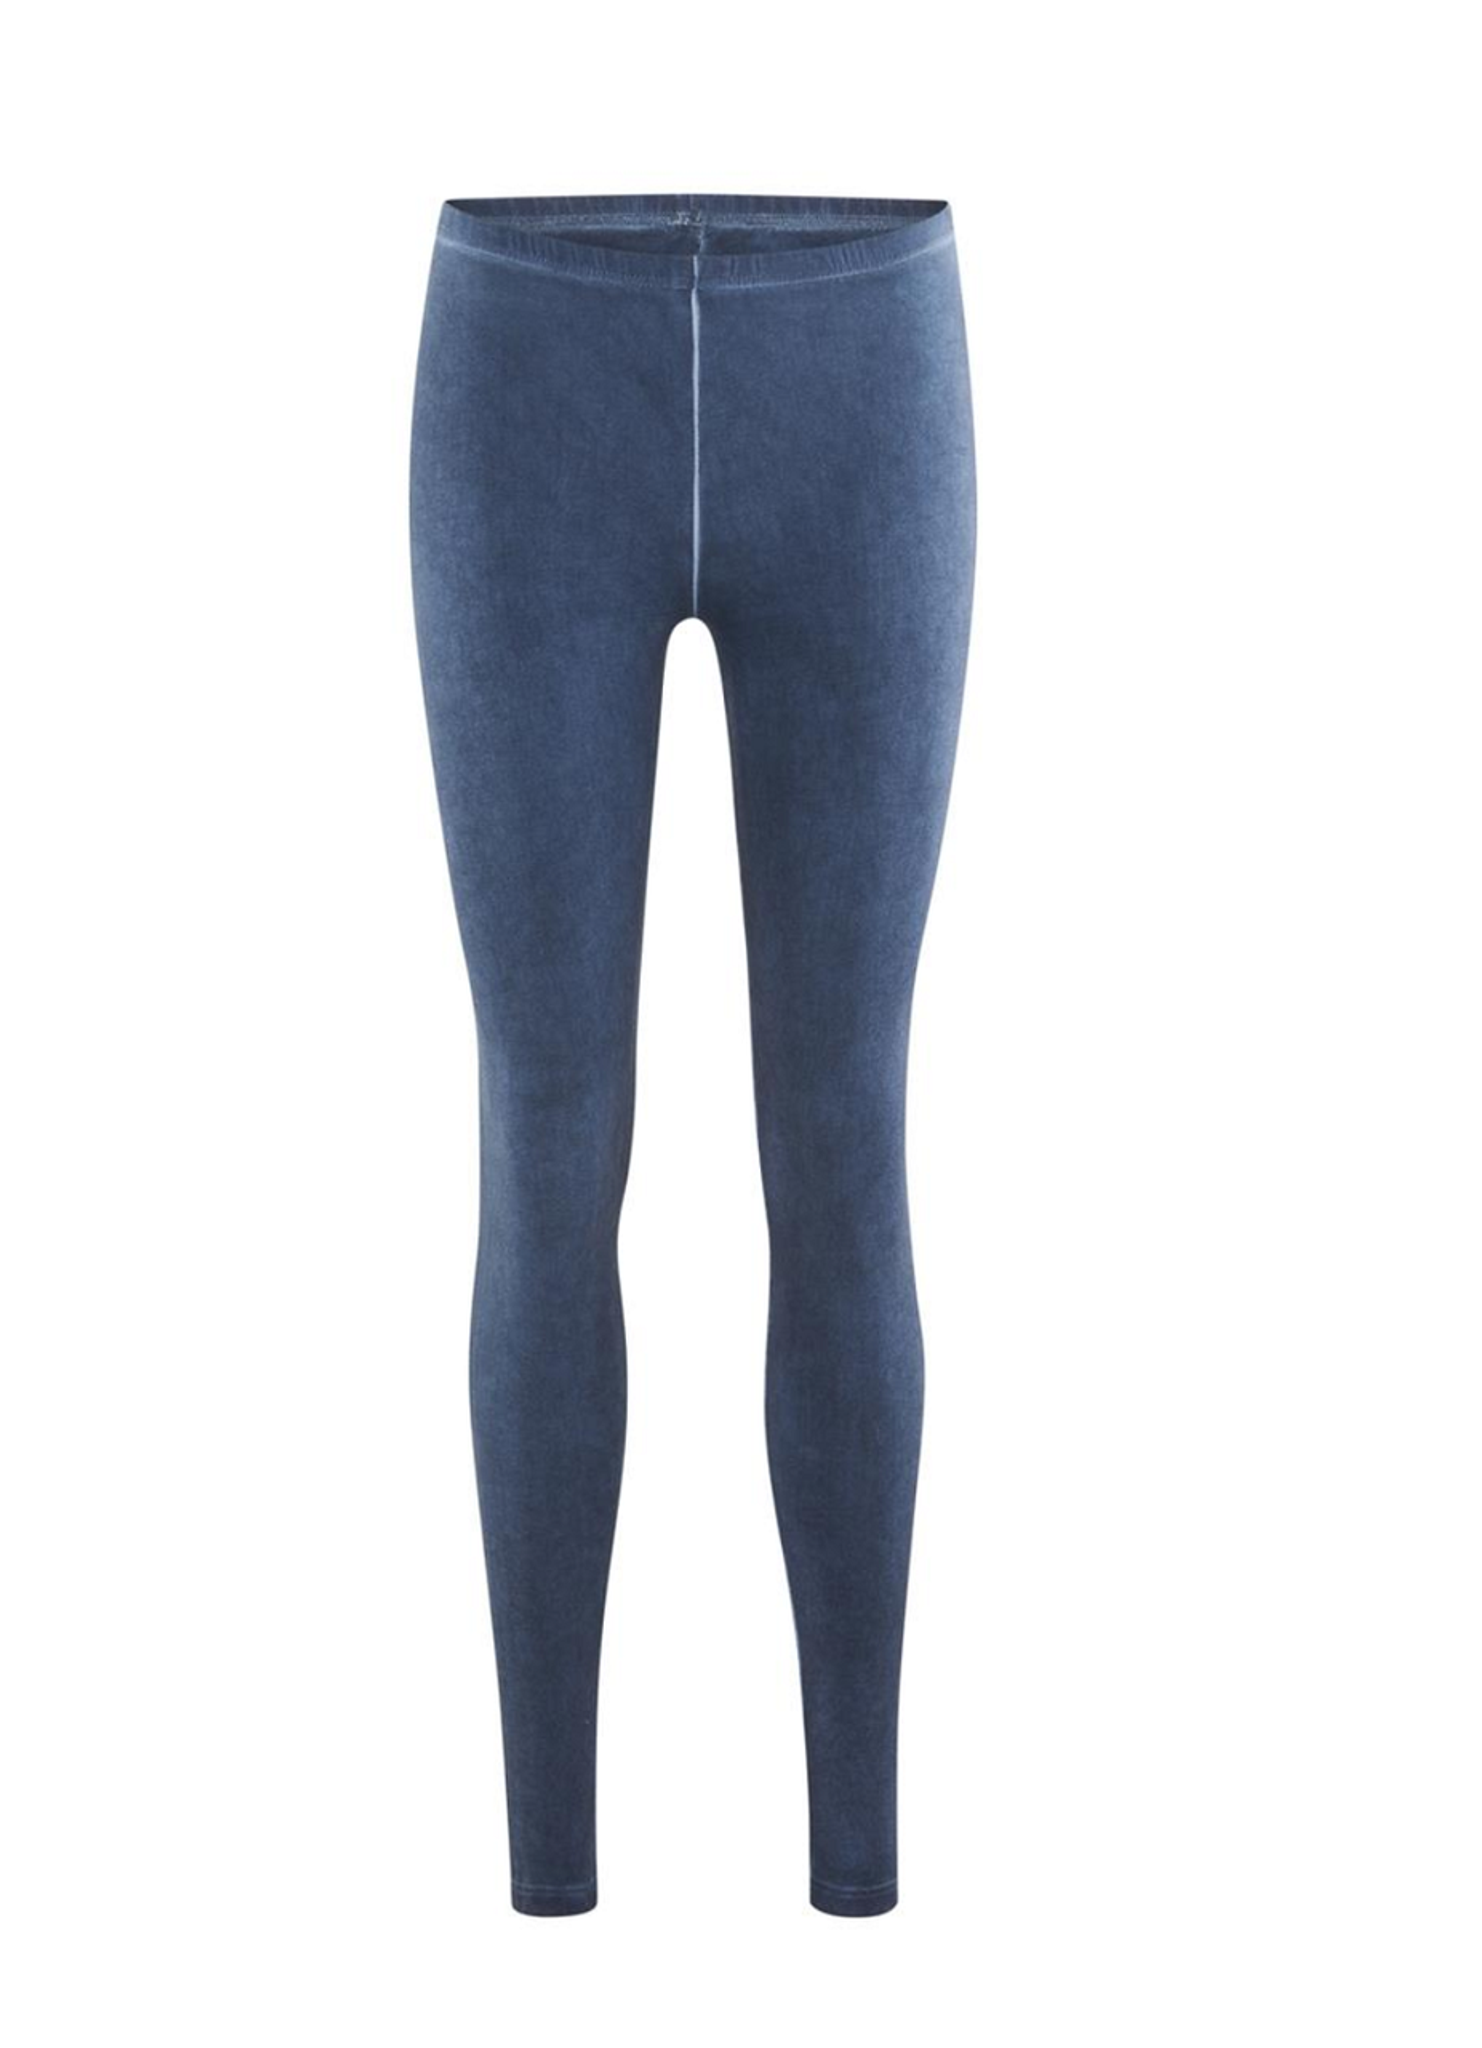 Women's Everyday Navy Tights - Organic Cotton blend - Solne Eco Department  Store